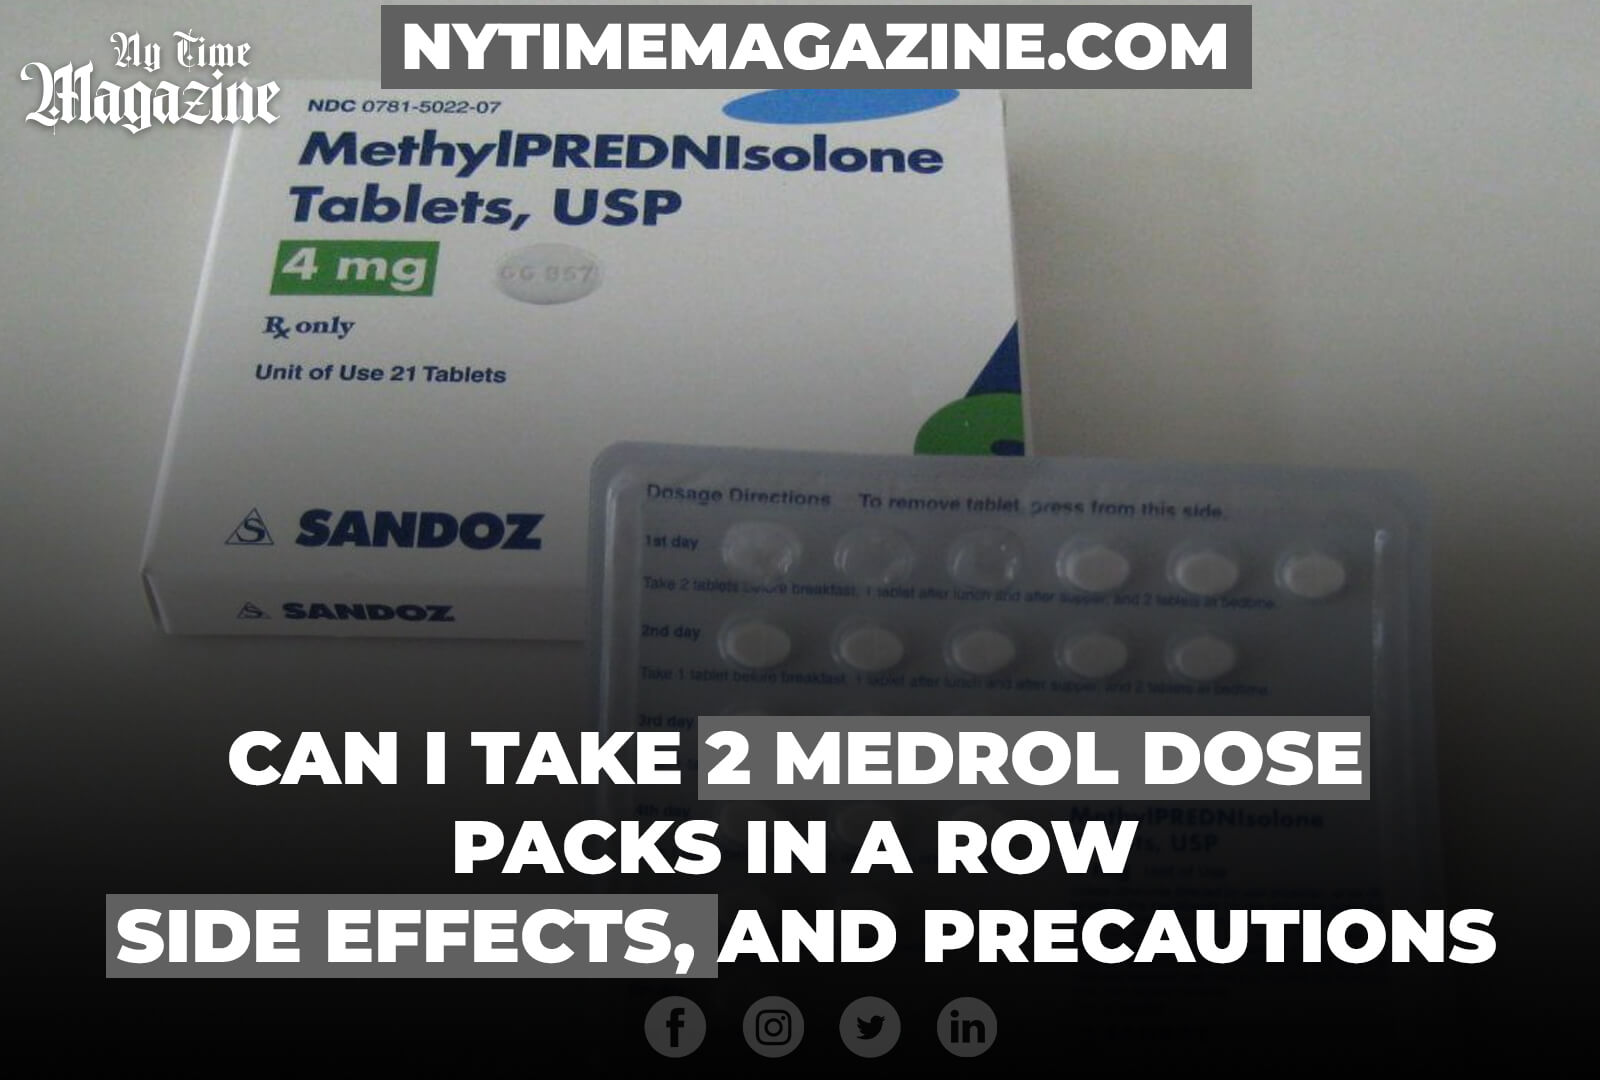 CAN I TAKE 2 MEDROL DOSE PACKS IN A ROW SIDE EFFECTS, AND PRECAUTIONS